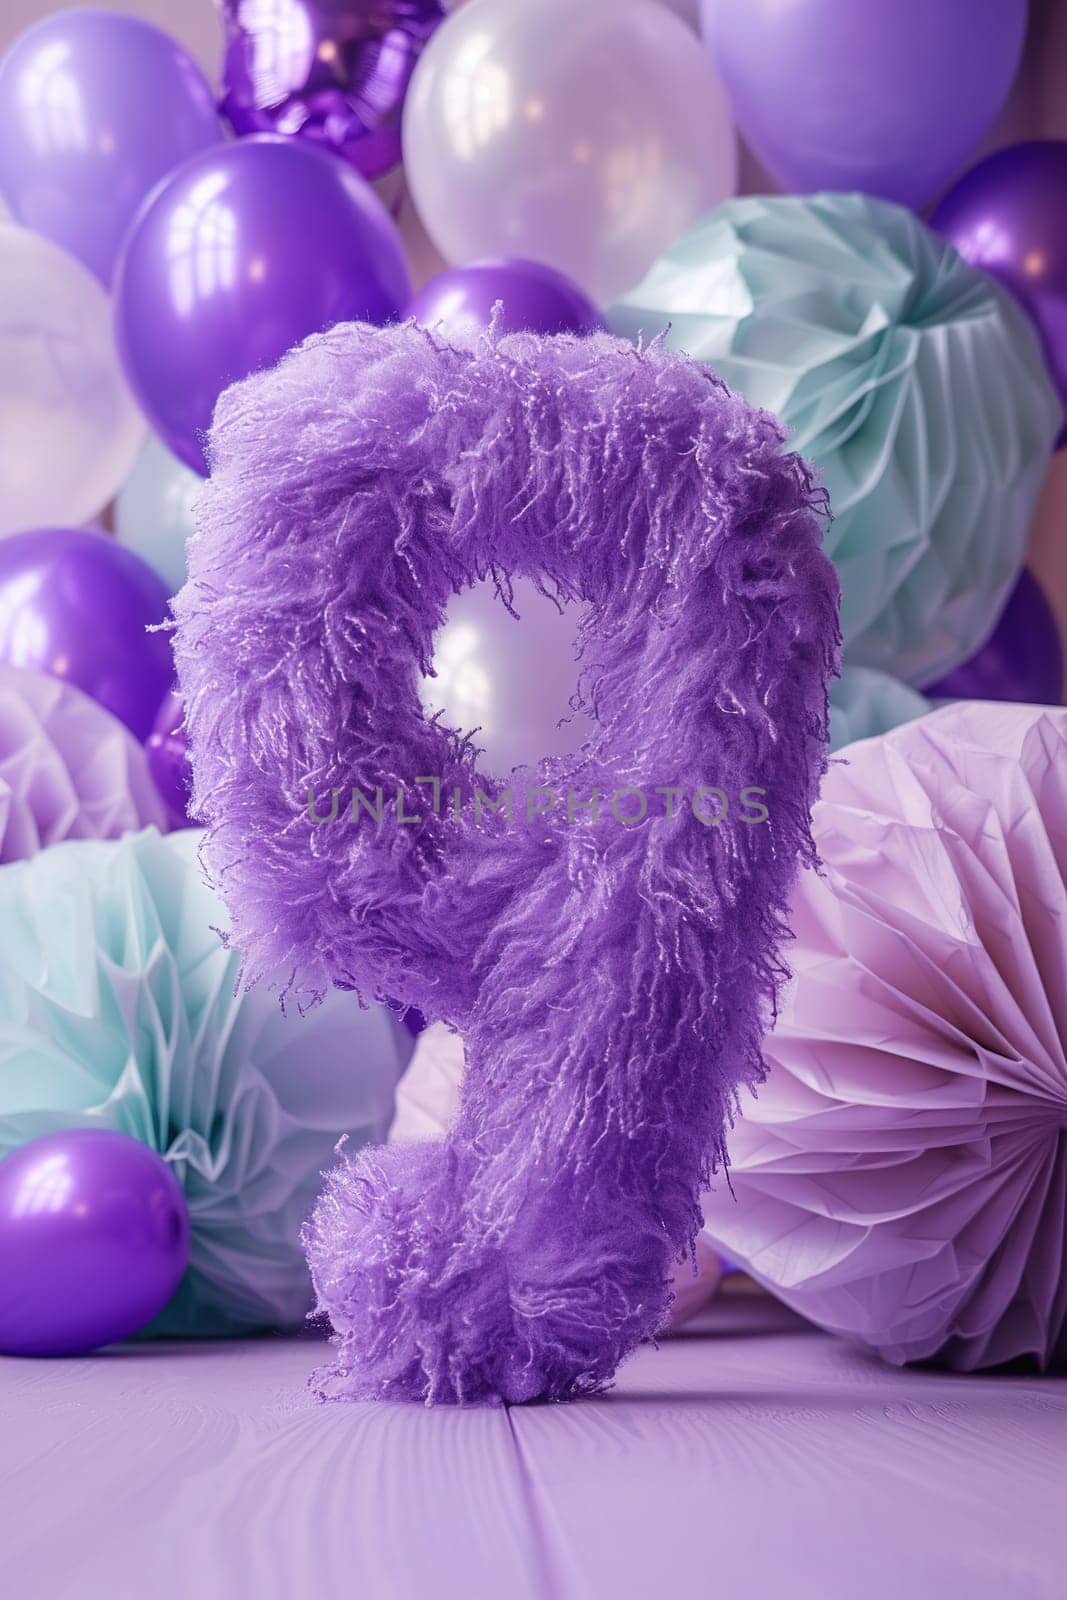 Vibrant, purple and fluffy number nine with blurred balloons on the background. Playful symbol 9. Invitation for ninth birthday celebration. Children, kids party. Greeting card, vertical. Generative AI